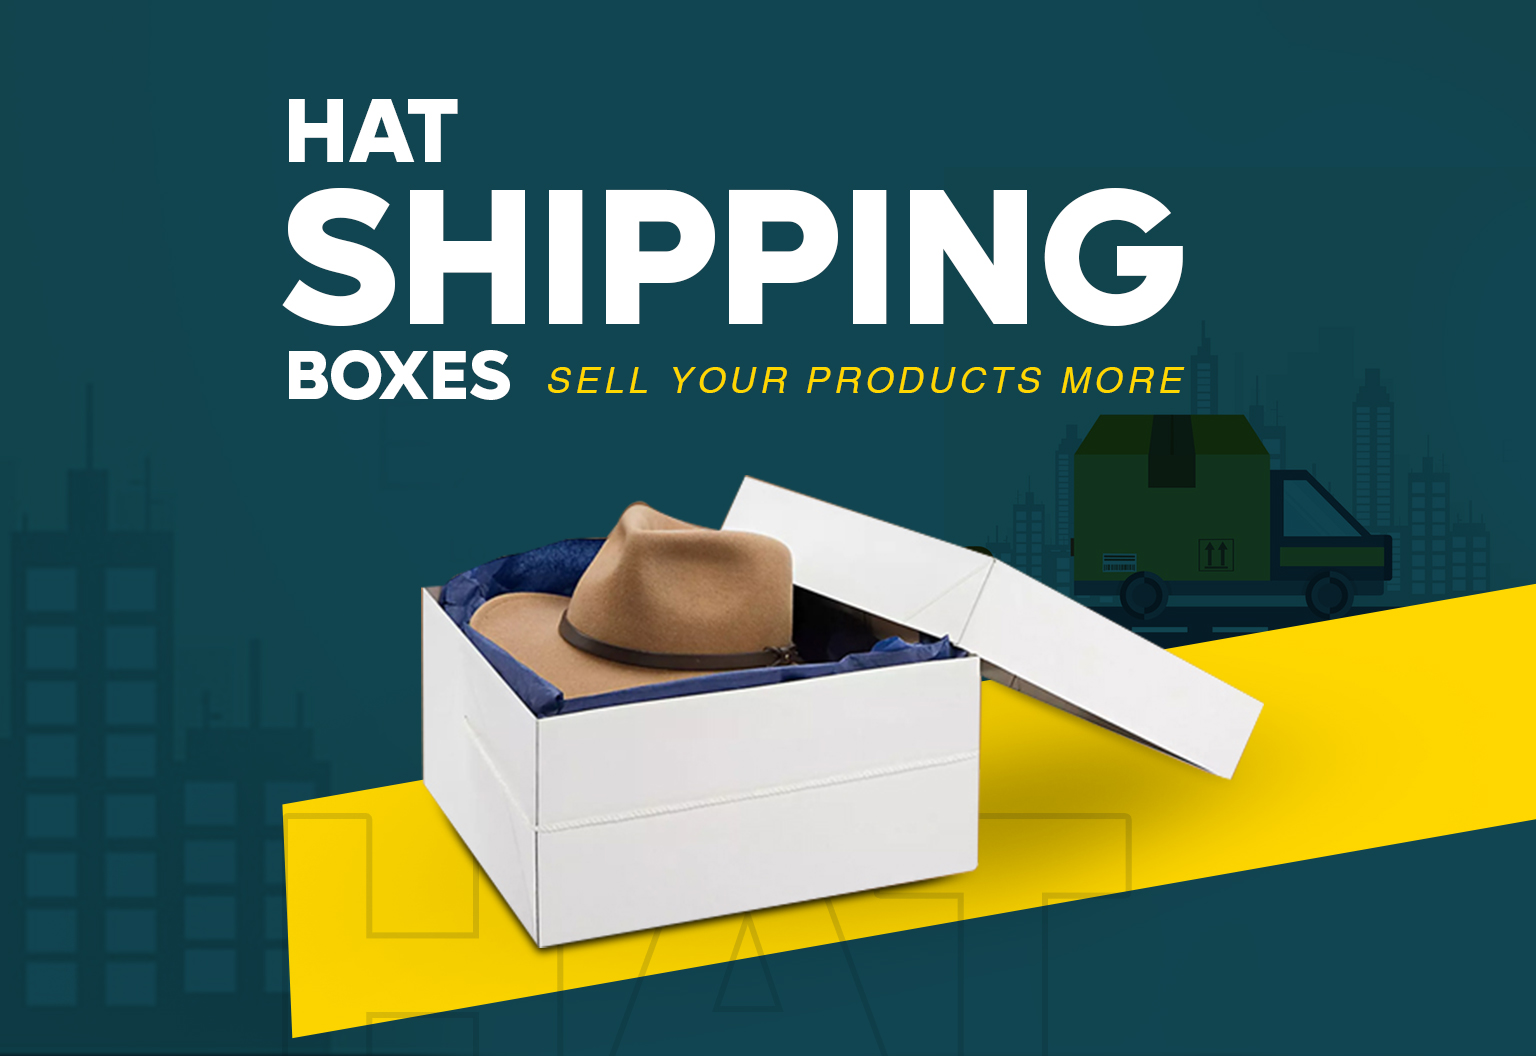 The-Ways-Hat-Shipping-Boxes-Sell-Your-Products-More